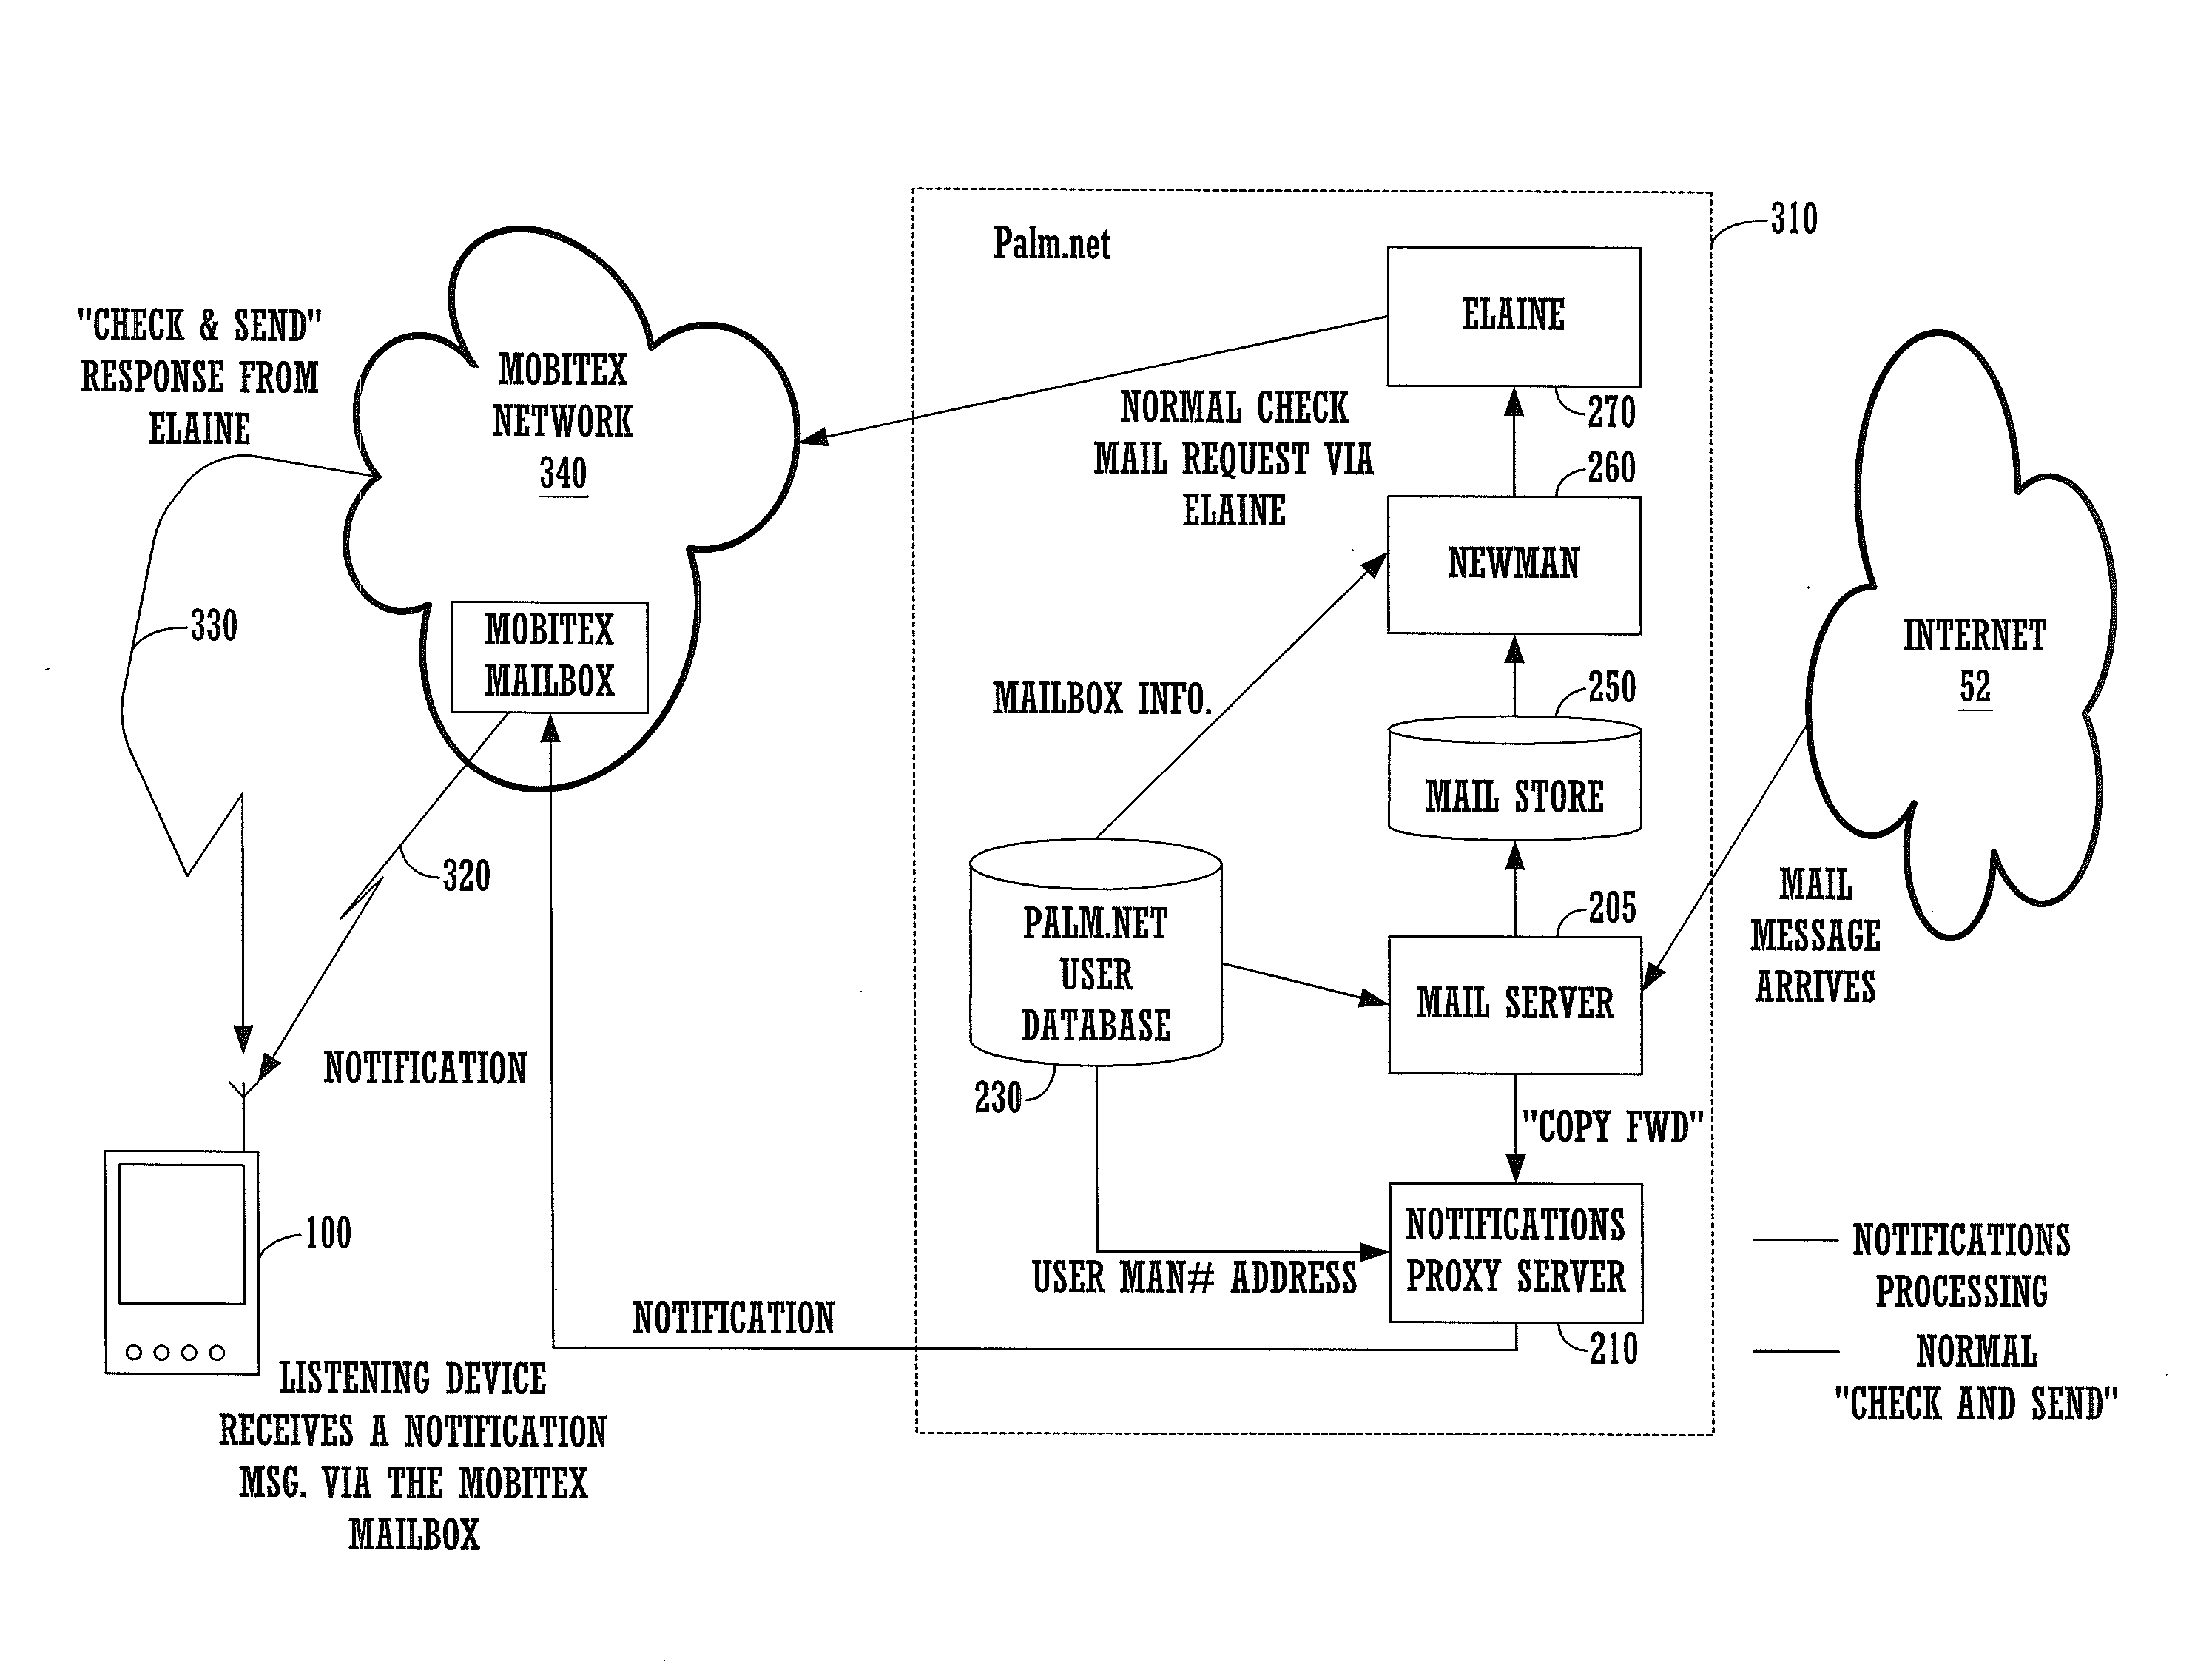 Method and system for pushing electronic messages to a wireless portable device using a standard mail server interface